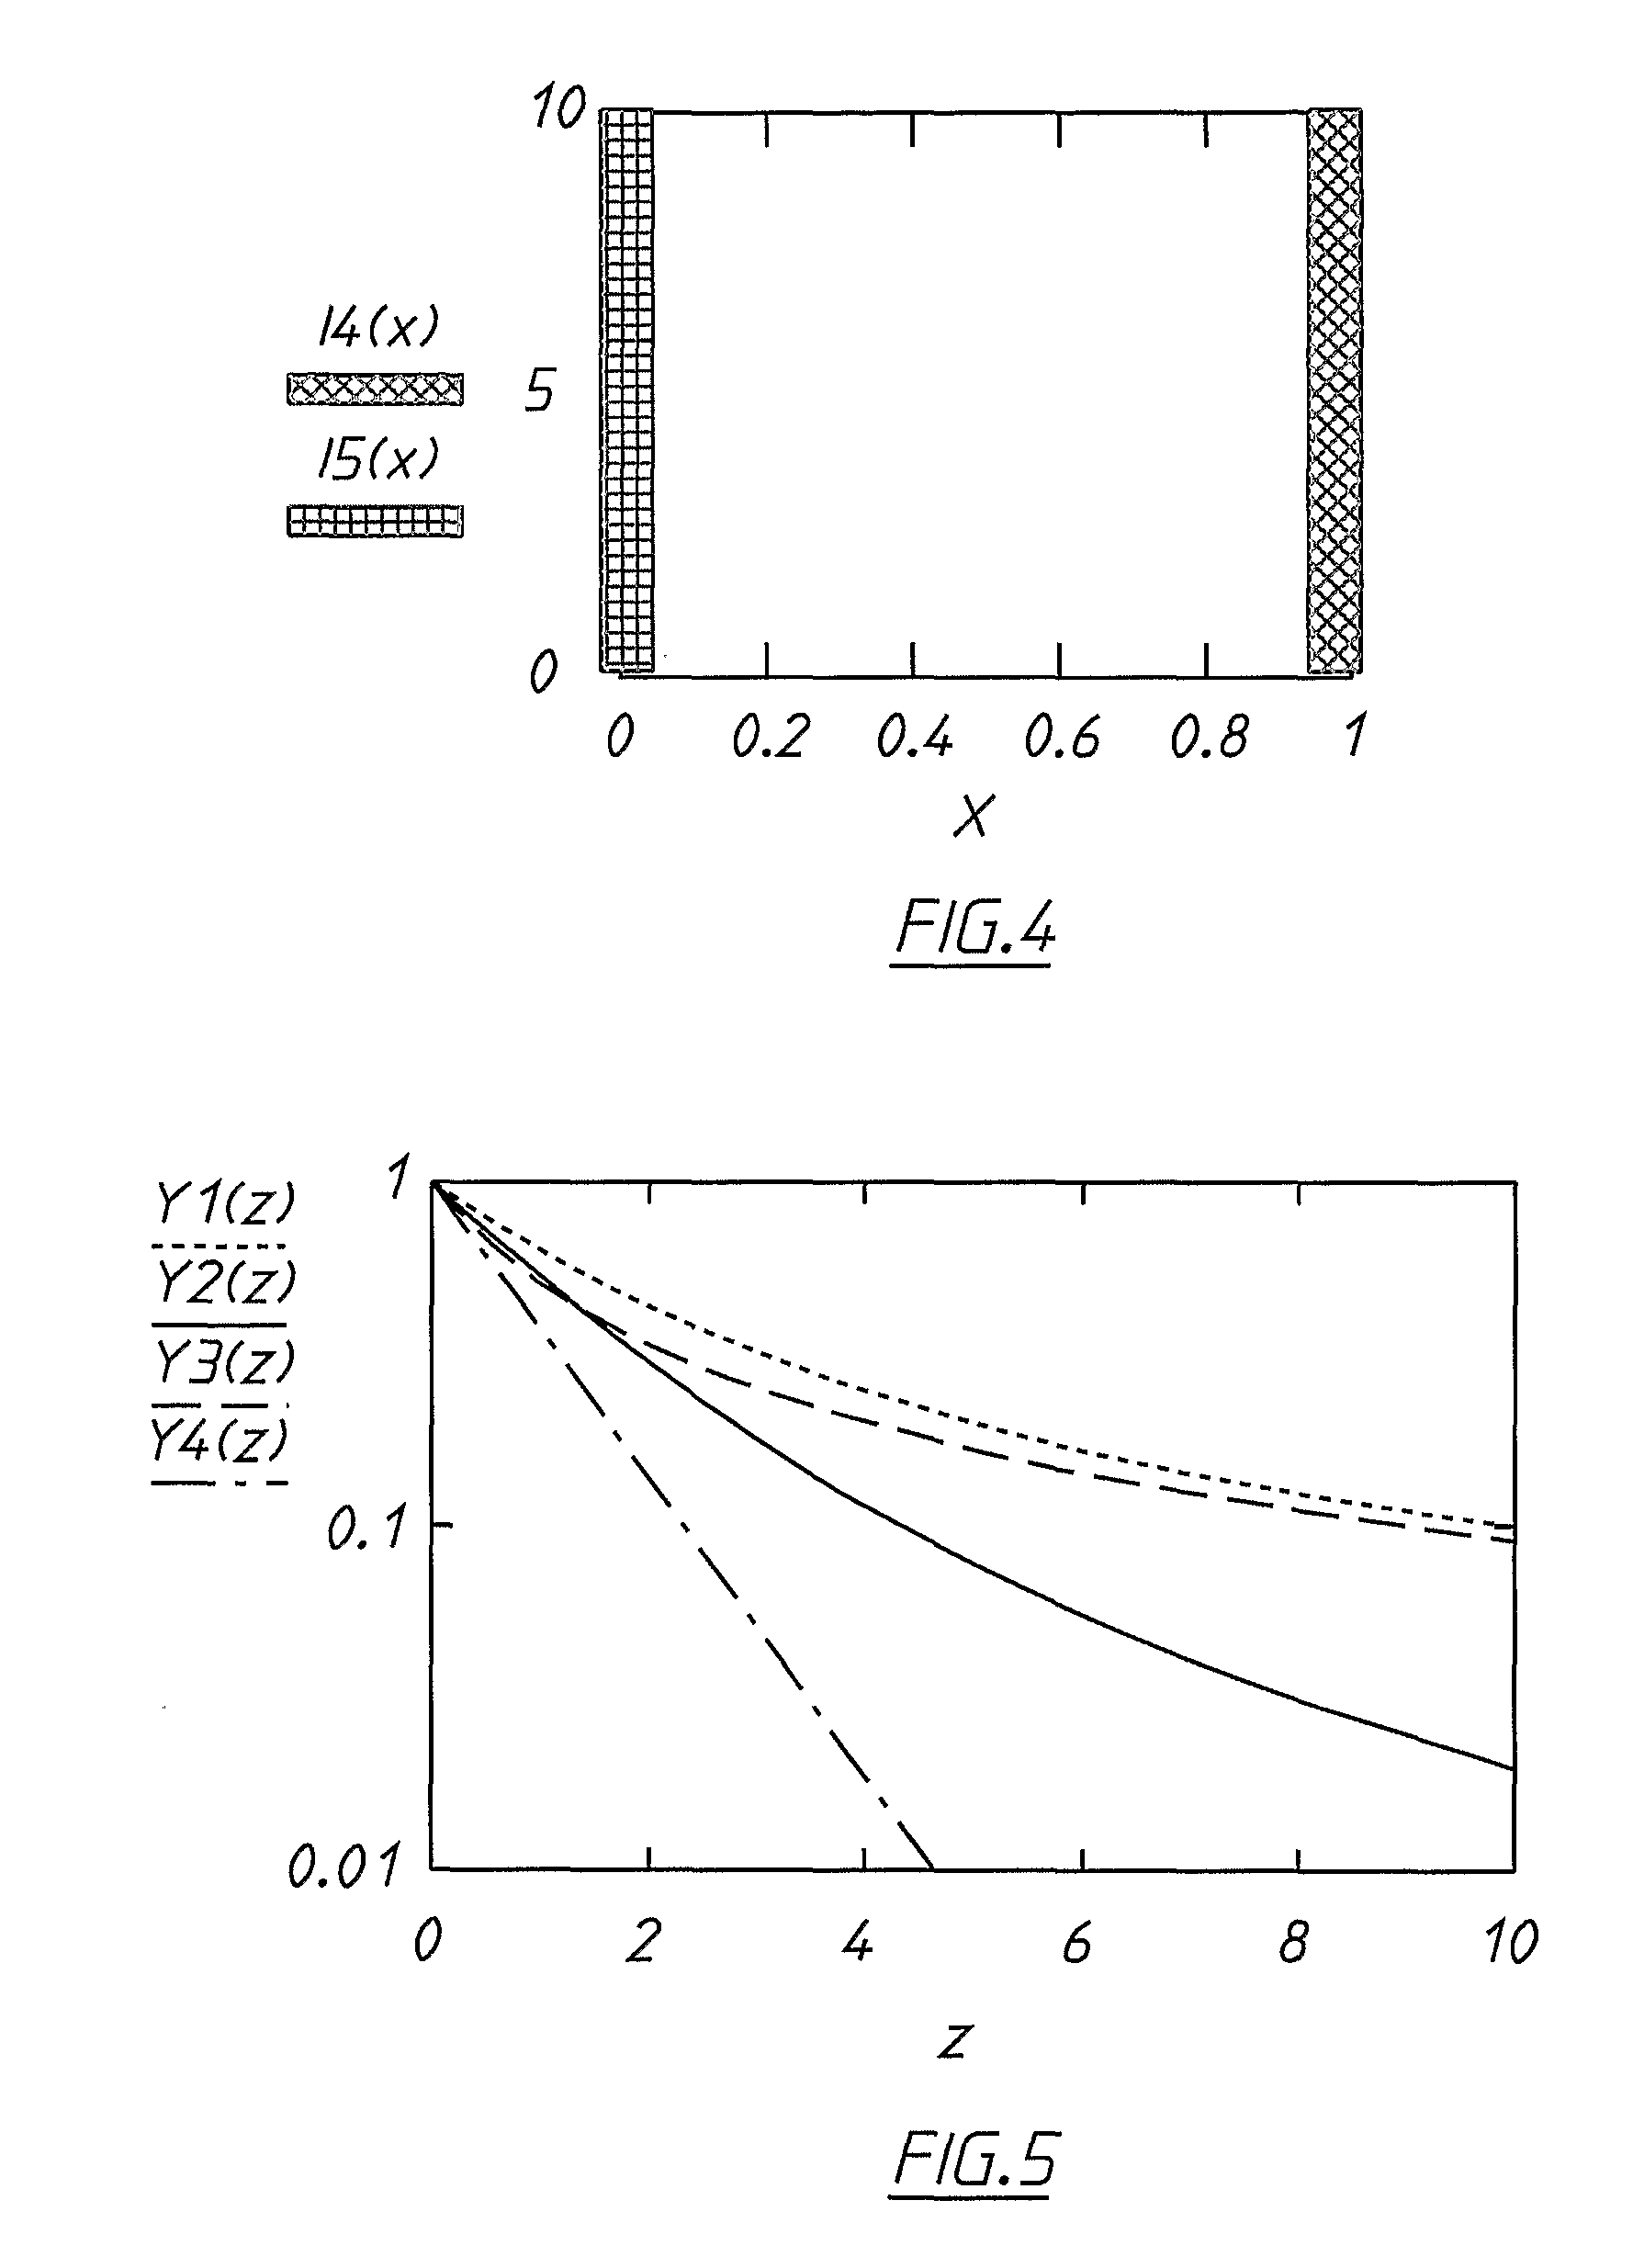 Measurement of hydraulic conductivity using a radioactive or activatable tracer